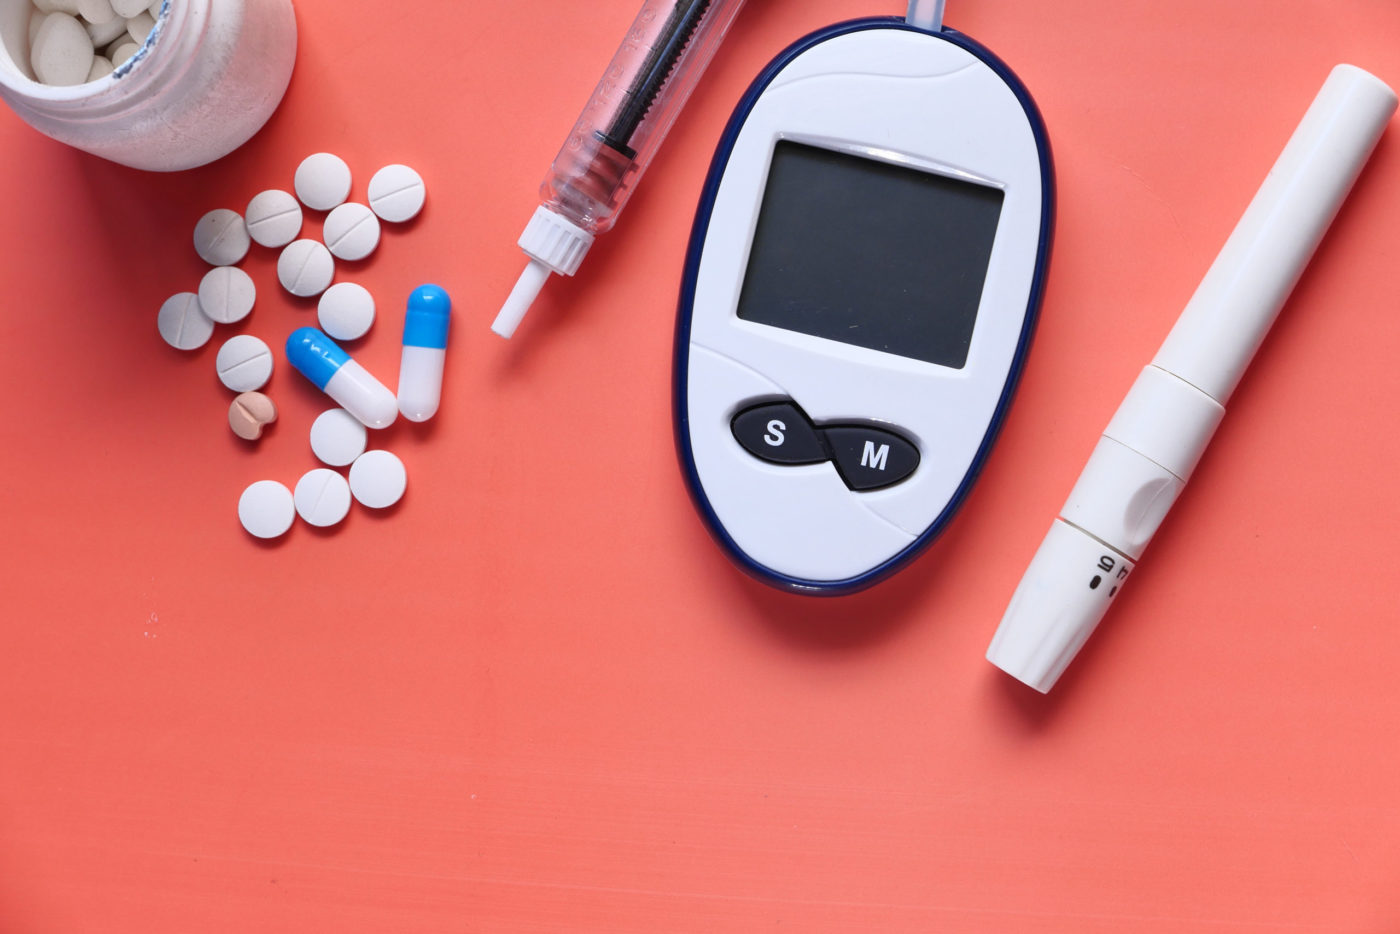 blood-sugar-measurement-for-diabetes-pills-and-stethoscope